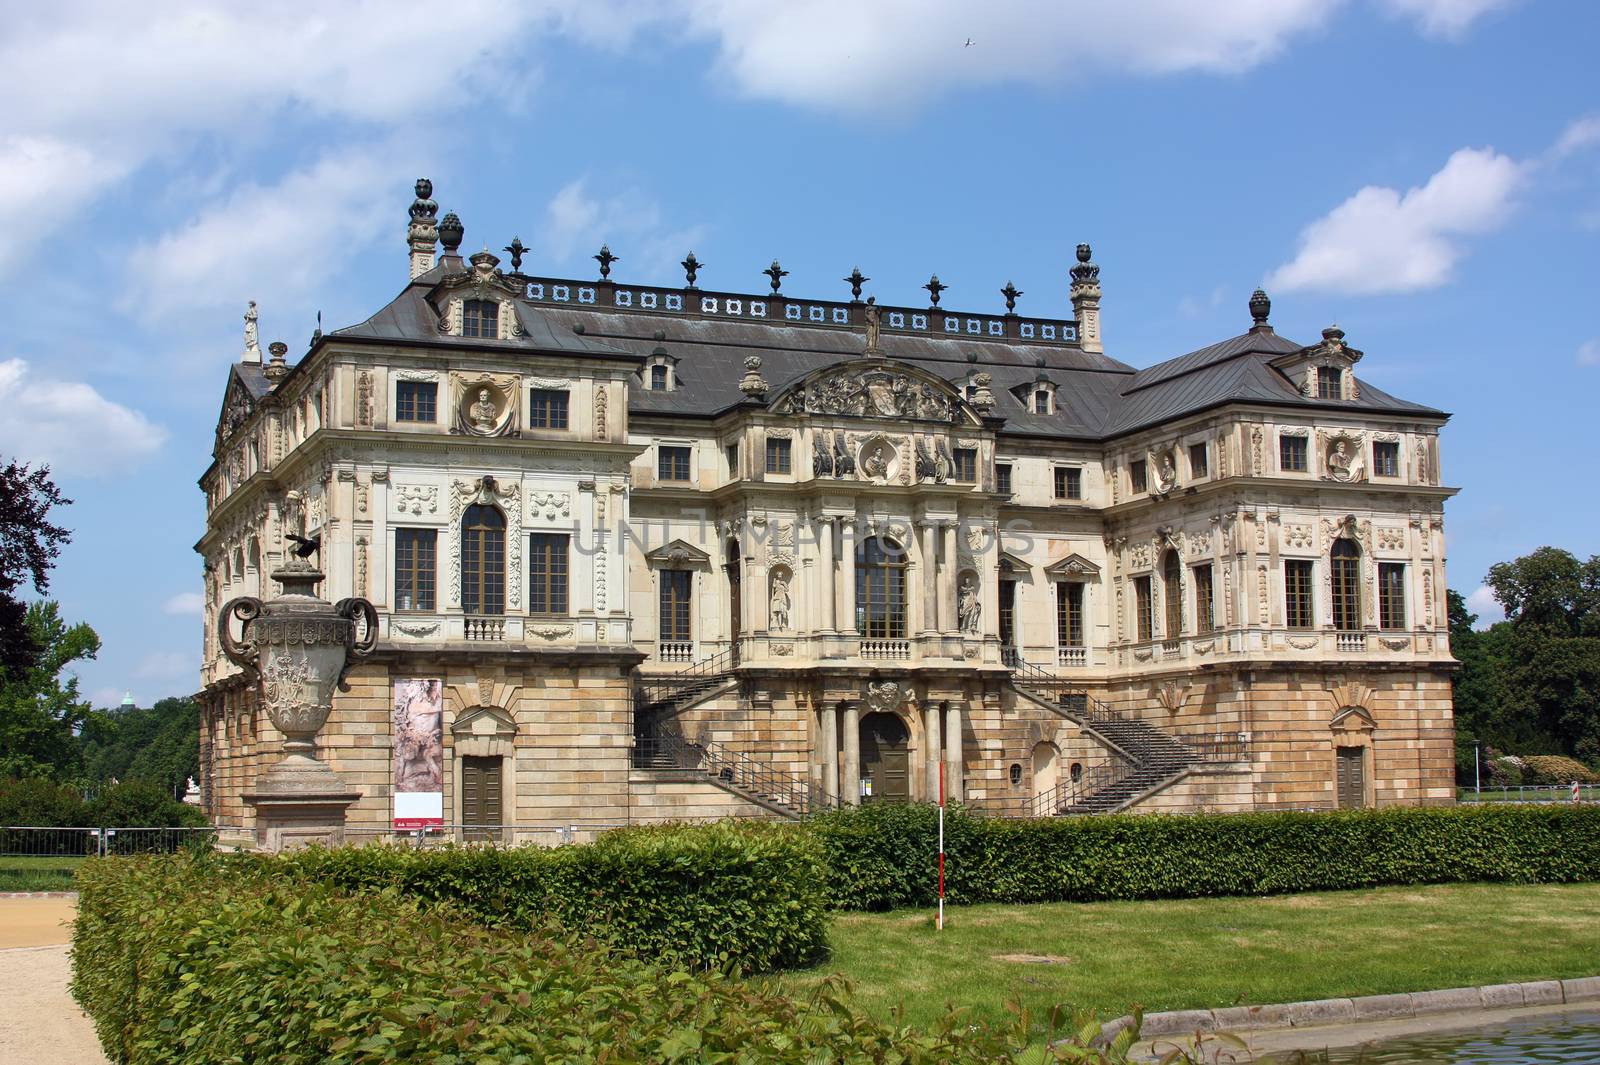 Palace in the great garden in the city of Dresden